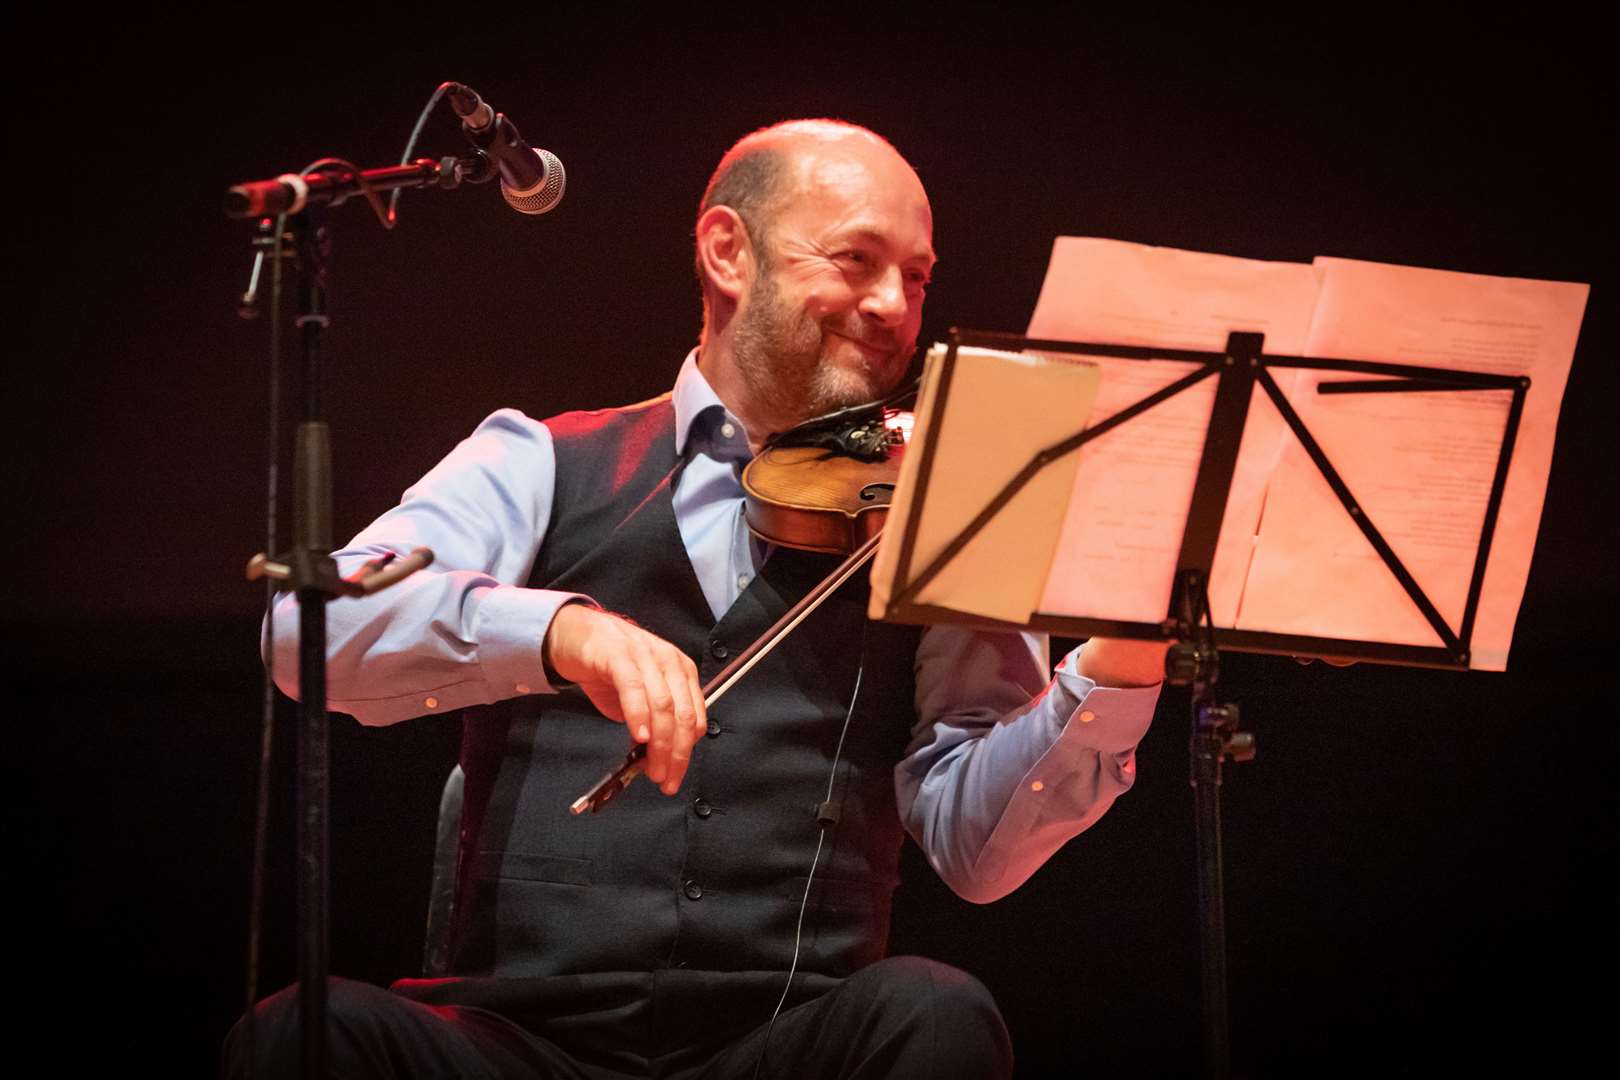 Iain MacFarlane of Glenfinnan Ceilidh Band performs on stage at Eden Court Theatre on the openng night of live music, The Royal National Mòd 2021